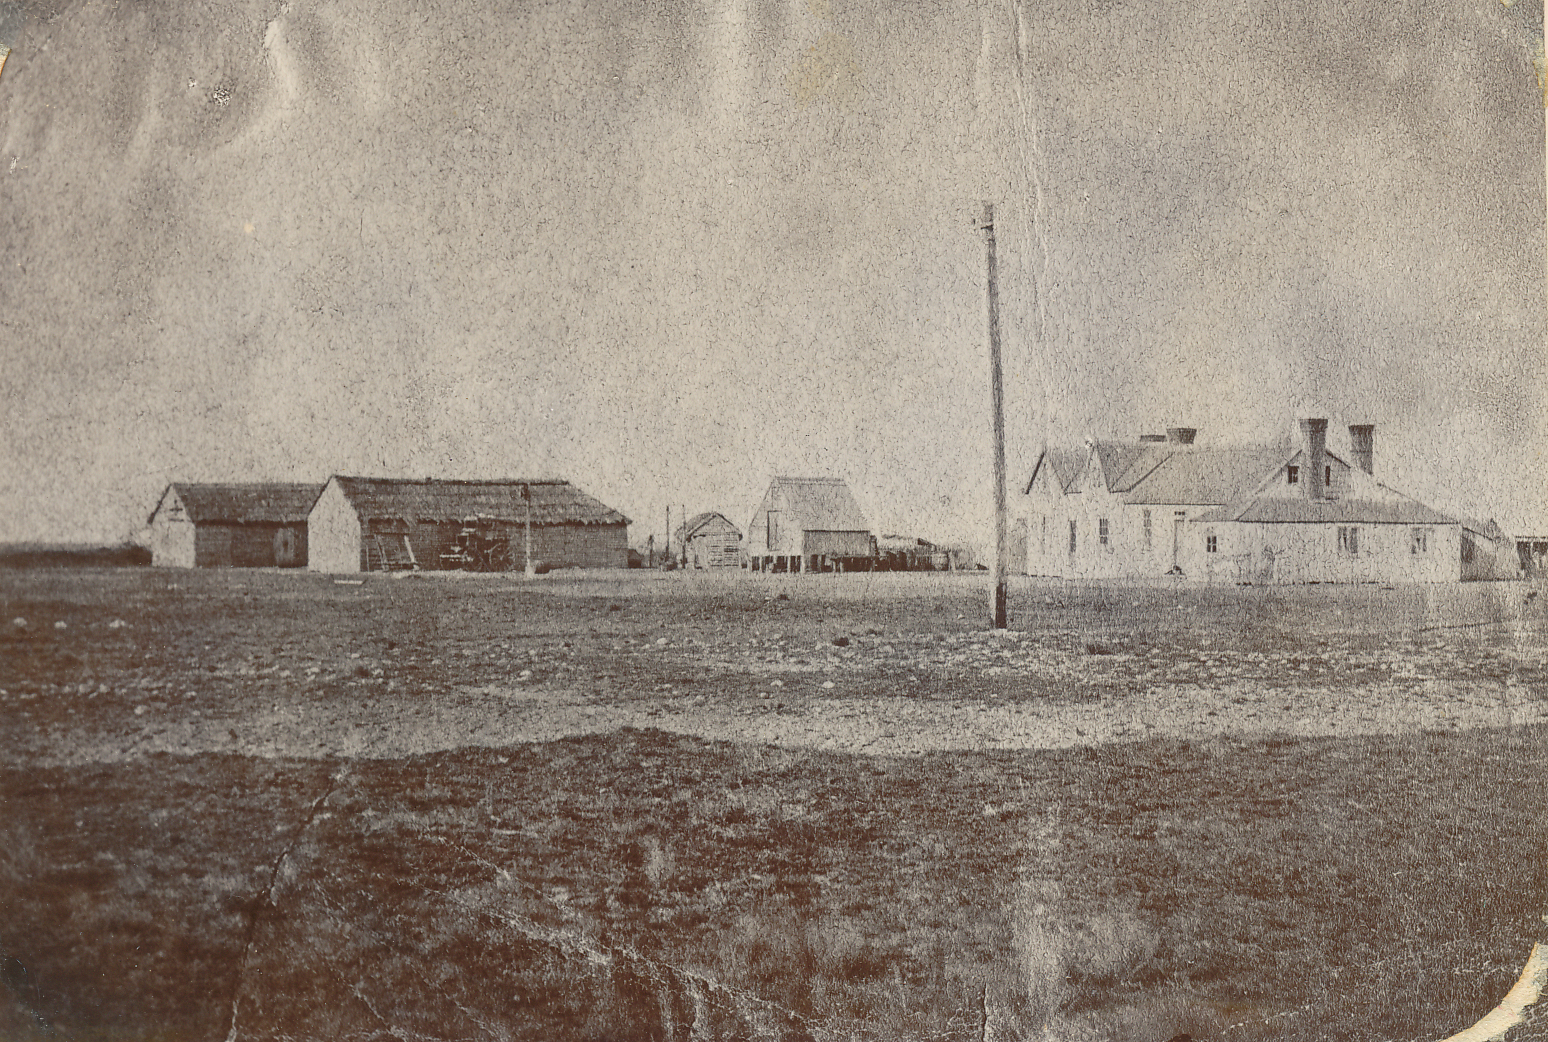 Early view of the Ashburton Arms accommodation house. Sepia tone 1850s - 1860s photo. Barren landscape, stables buildings at left, small hut in middle, flagpole piddle distance, inn at right of frame.